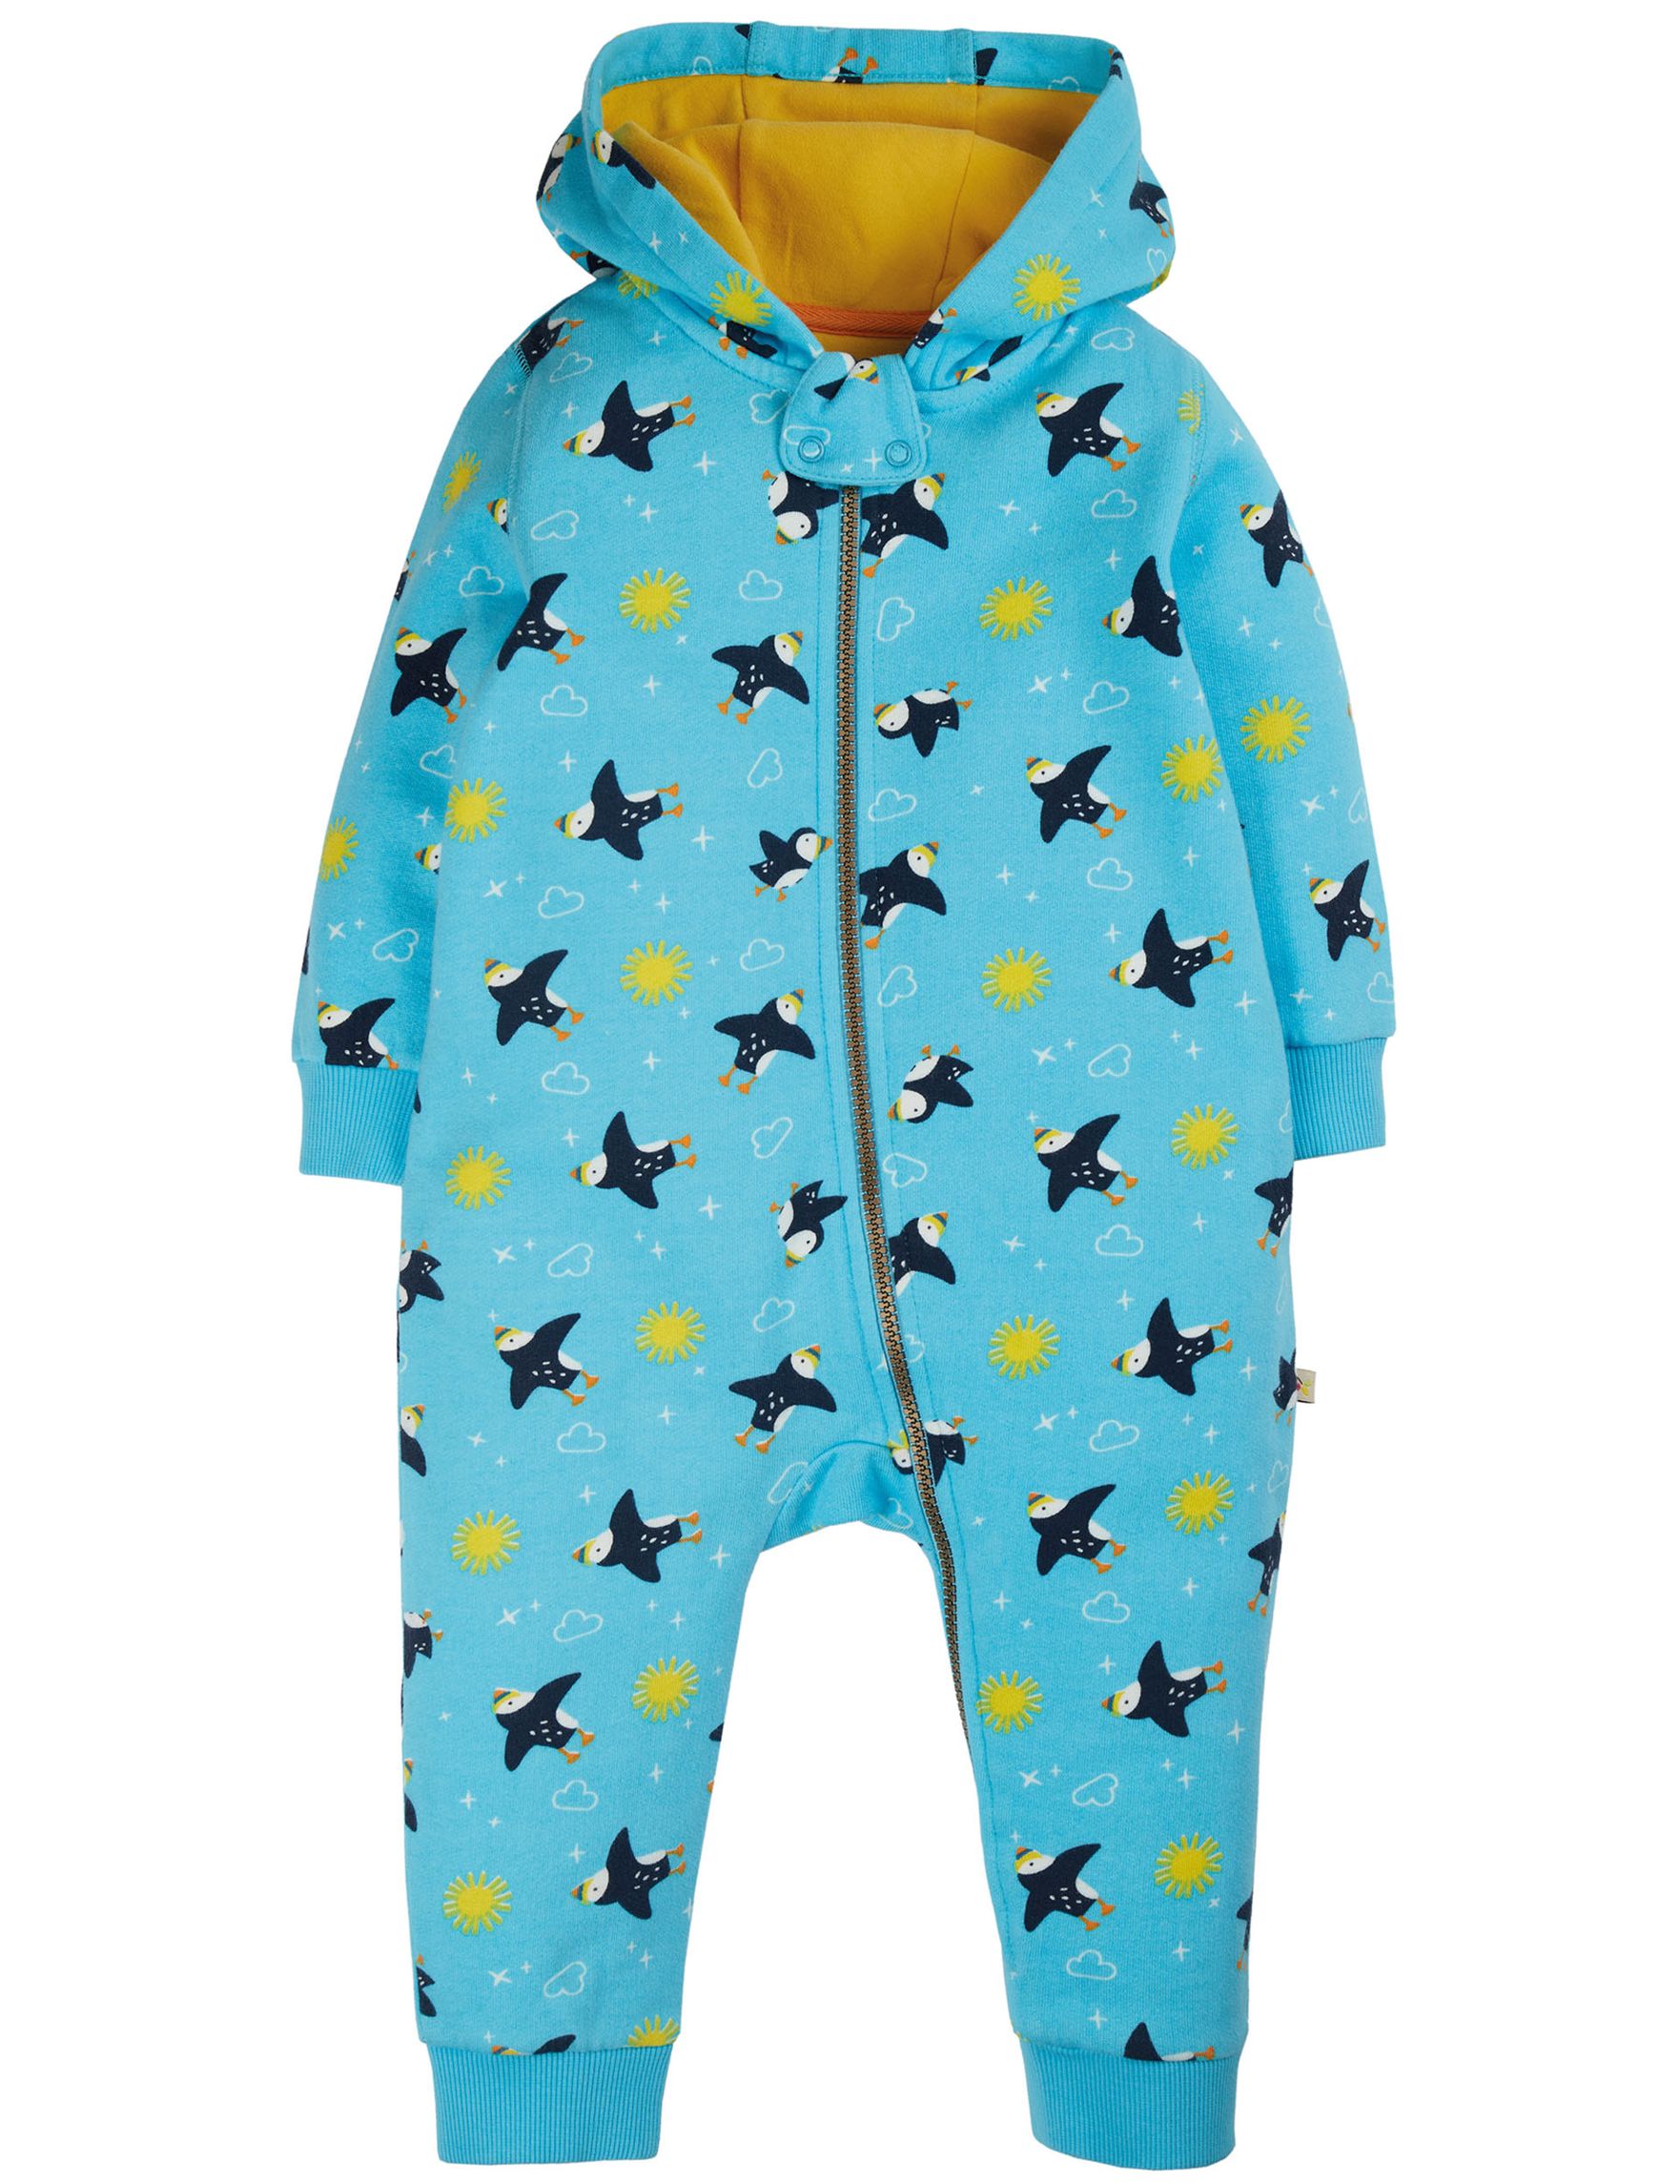 Toddler Snuggle Suit